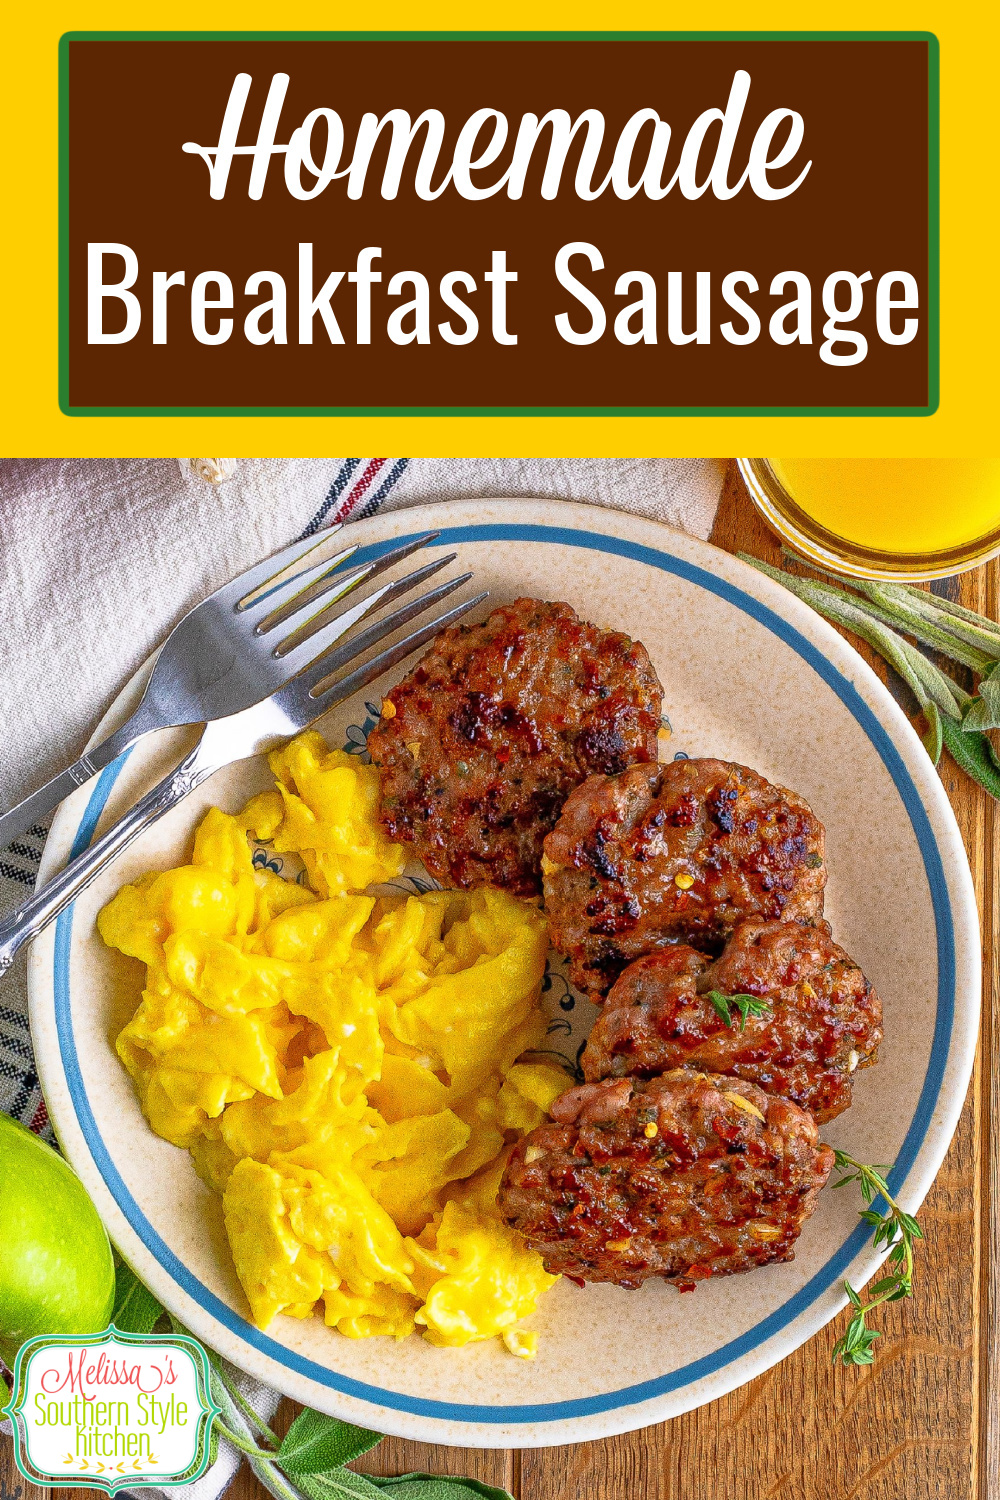 This homemade Breakfast Sausage recipe features a combination of fresh herbs and seasonings that makes it next level in flavor #breakfastrecipes #breakfastsausage #groundporkrecipes #easyporkrecipes #homemadesausagerecipe #sausage #countrysausage #southernsausagerecipe